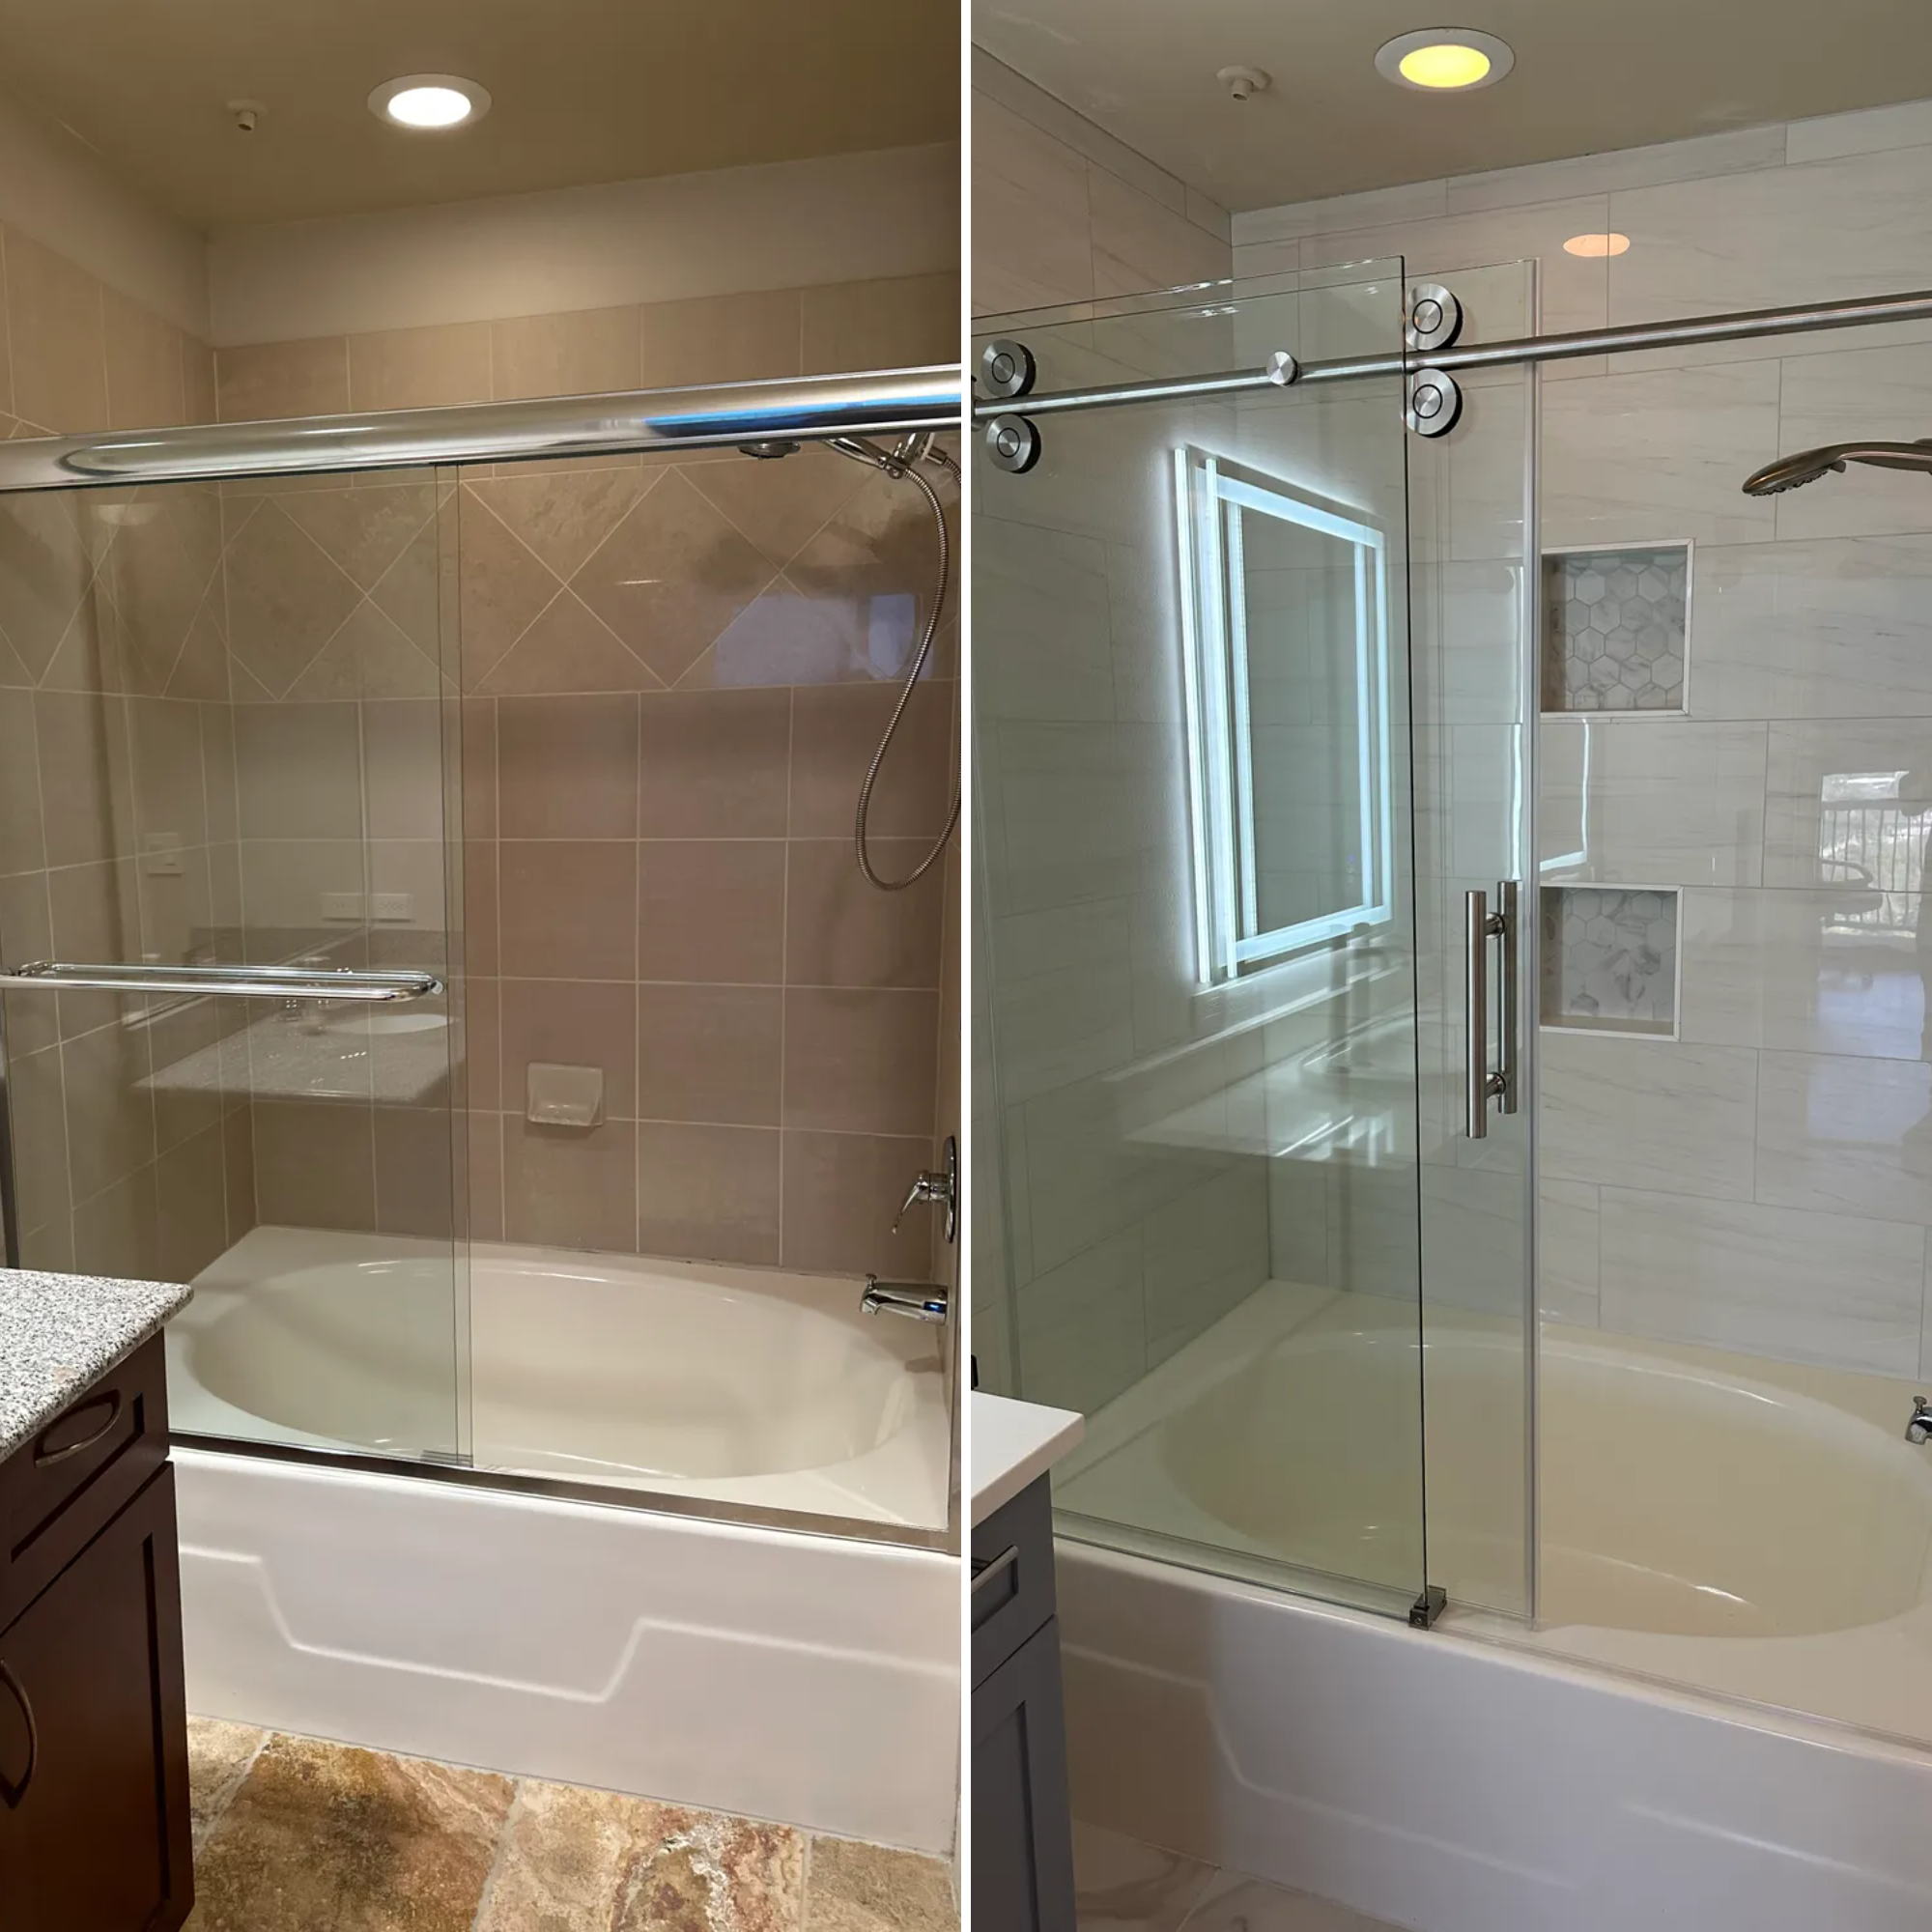 All Photos for Luxurious Construction in Houston, TX